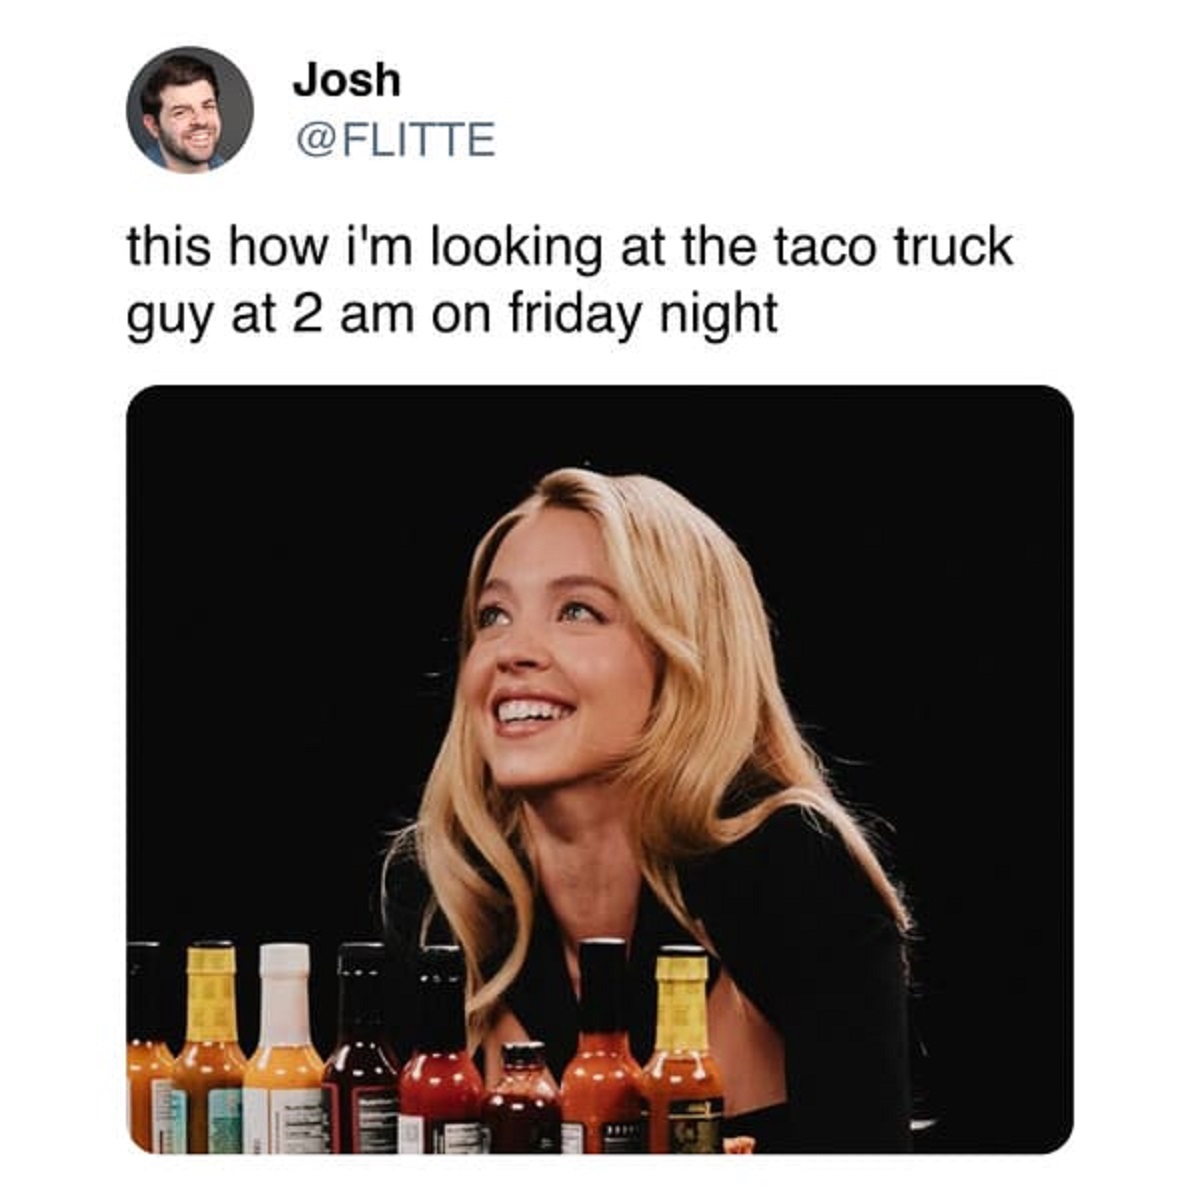 communication - Josh this how i'm looking at the taco truck guy at 2 am on friday night